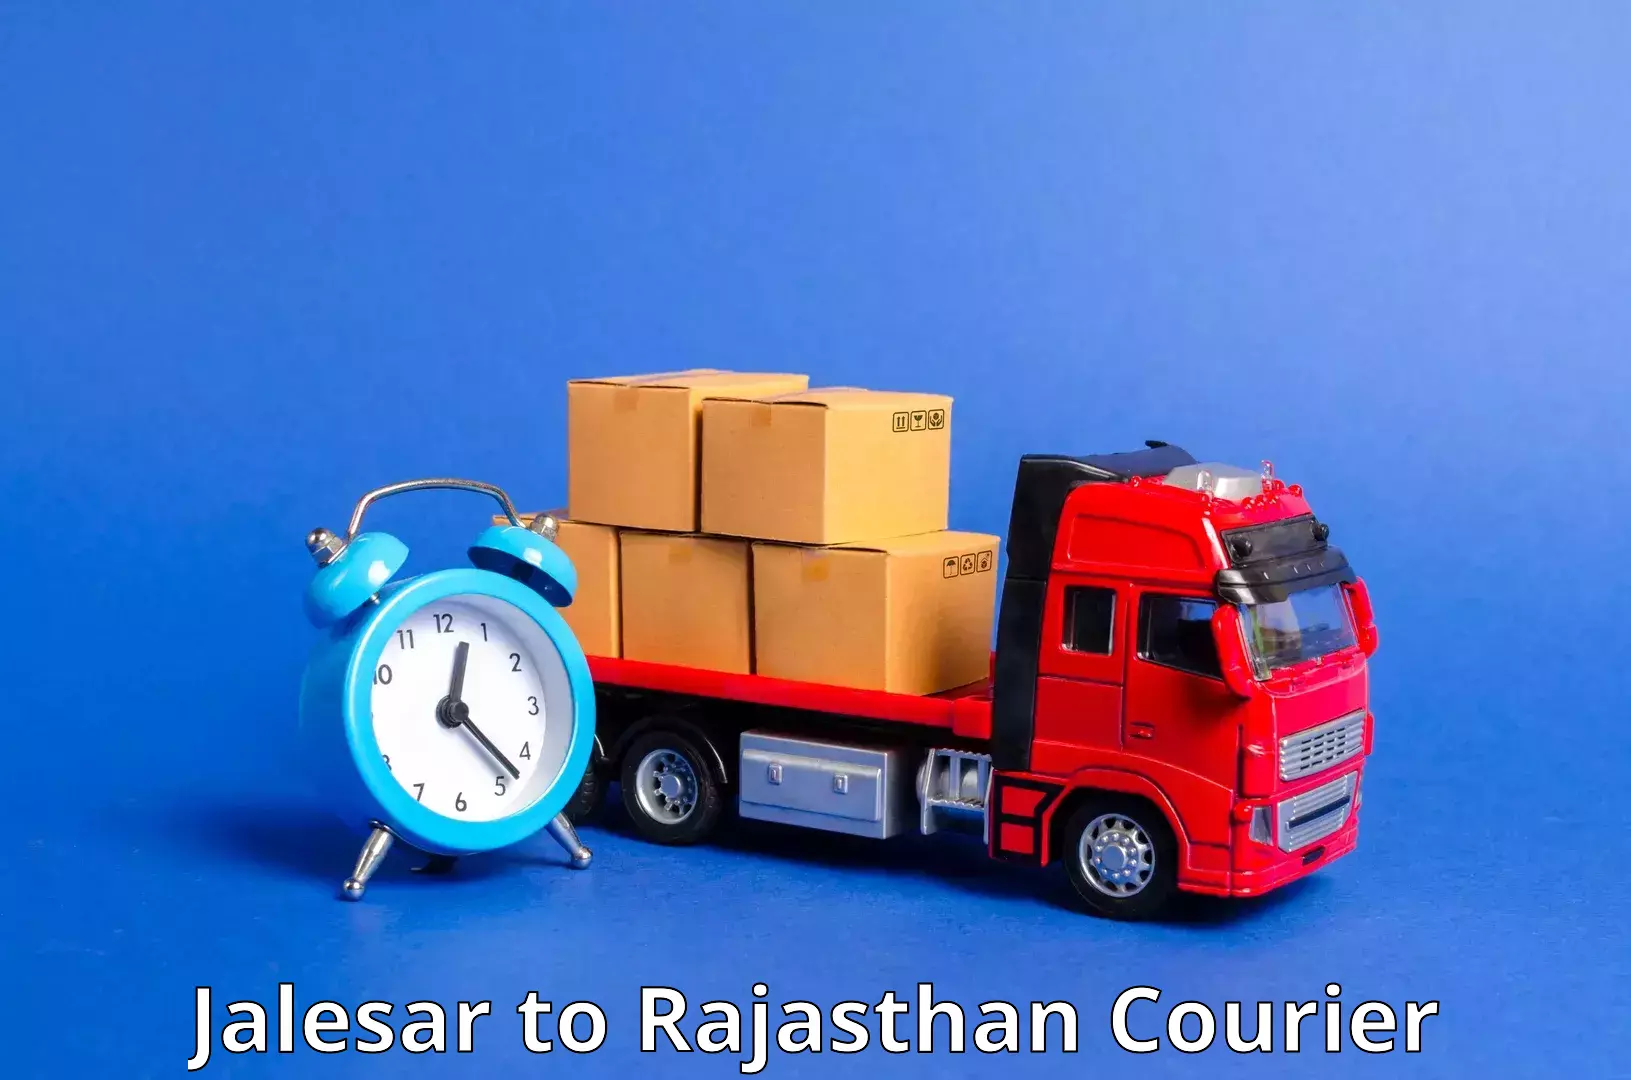 State-of-the-art courier technology Jalesar to Pratapgarh Rajasthan